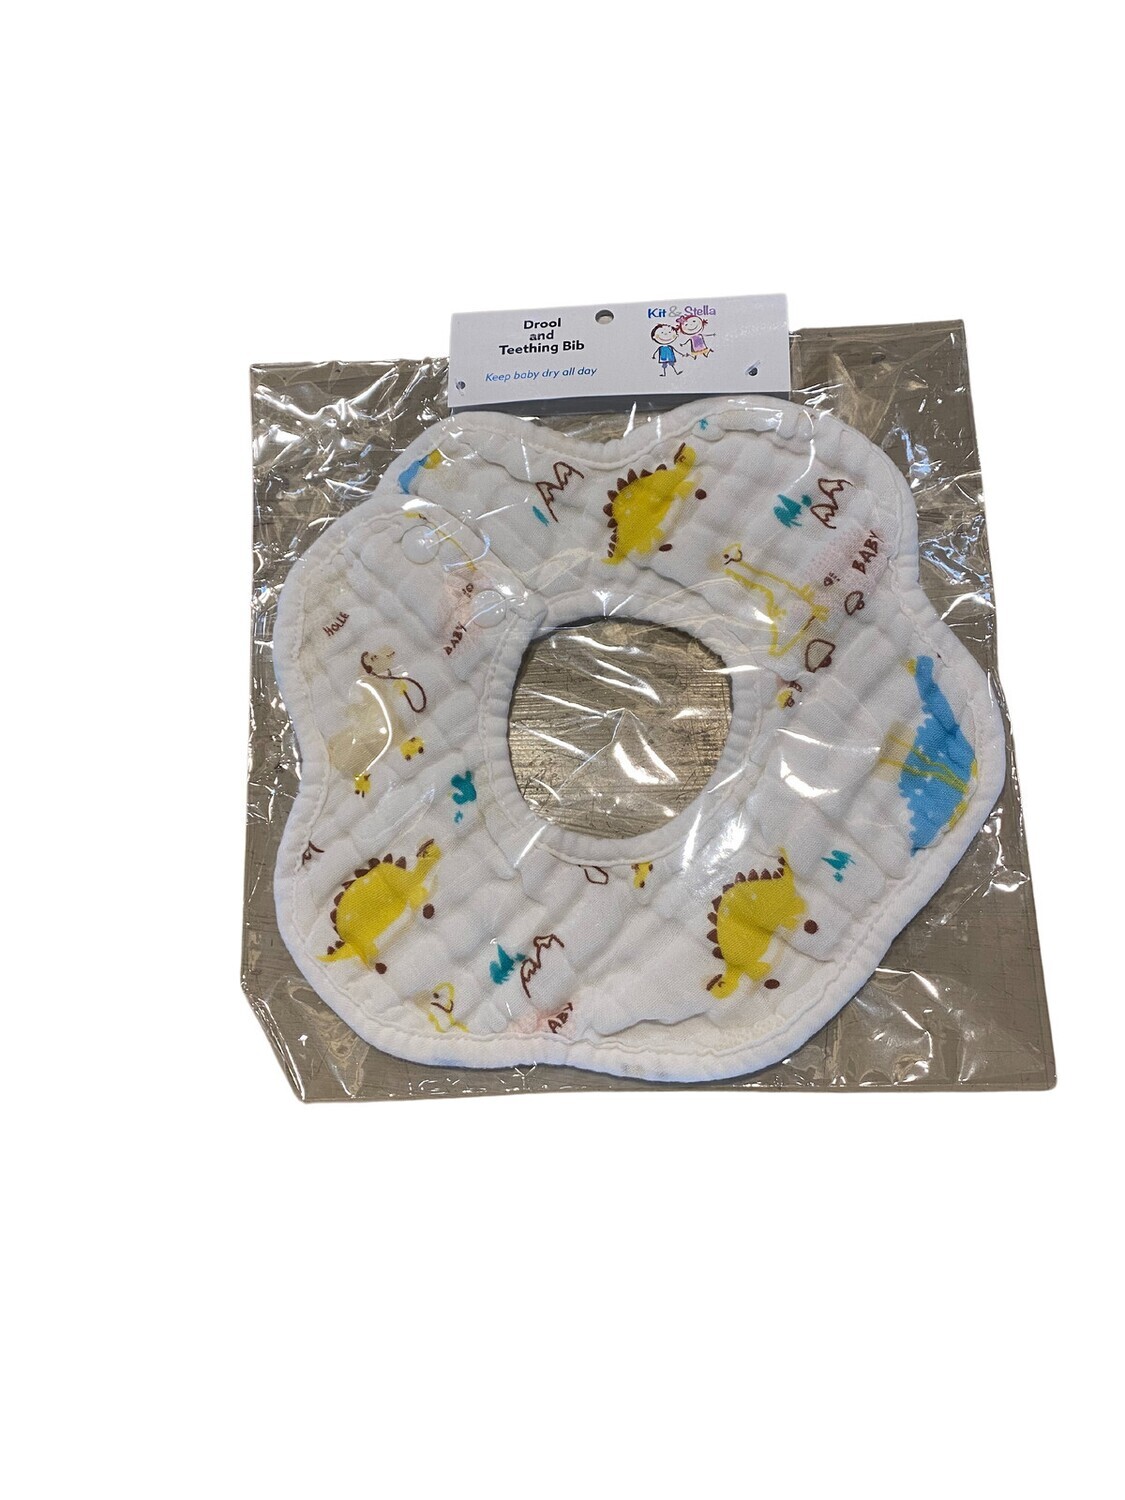 FR BABY BIB FOR DROOLING